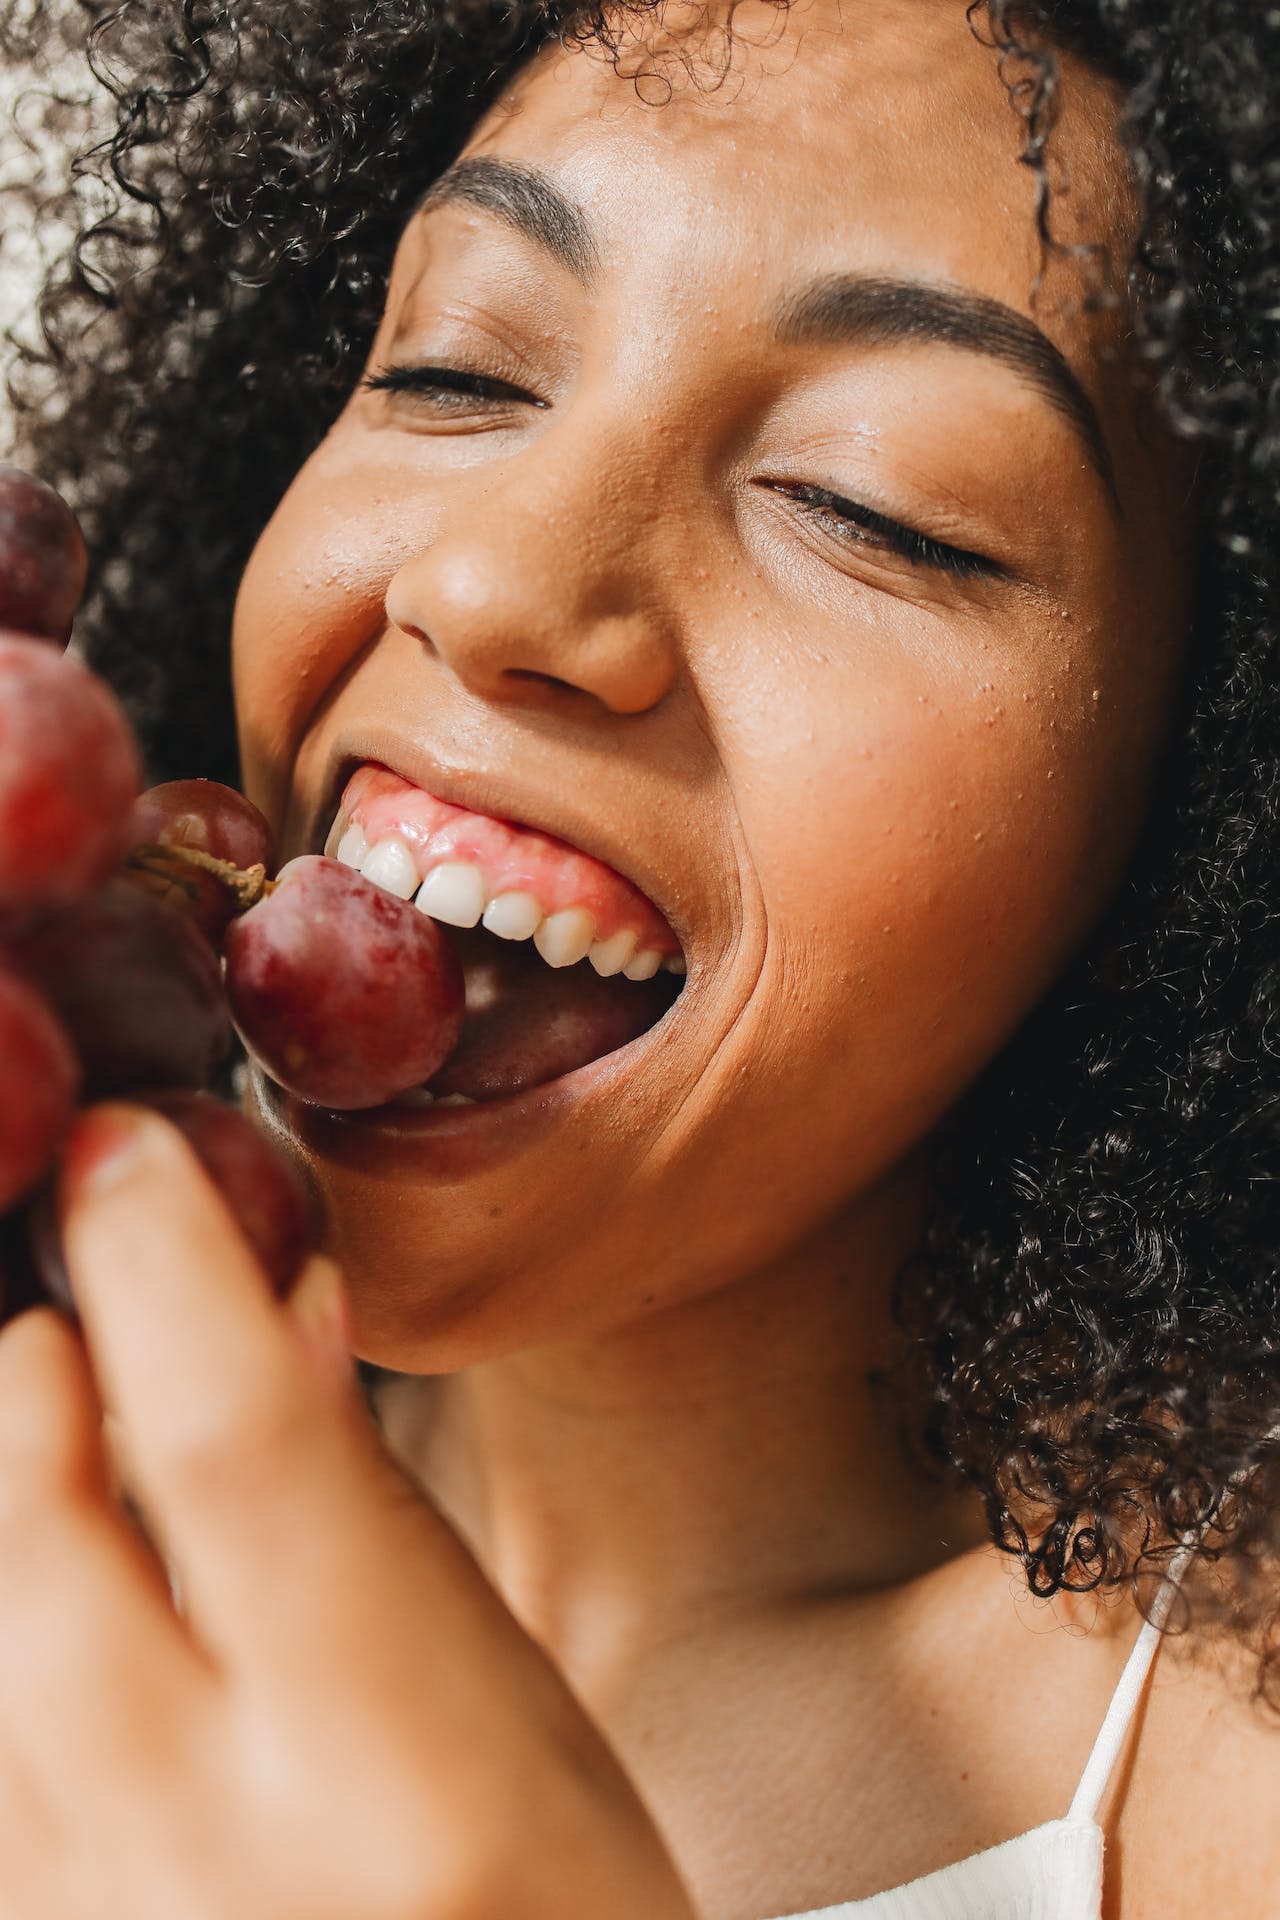 woman eating grapes and smiling